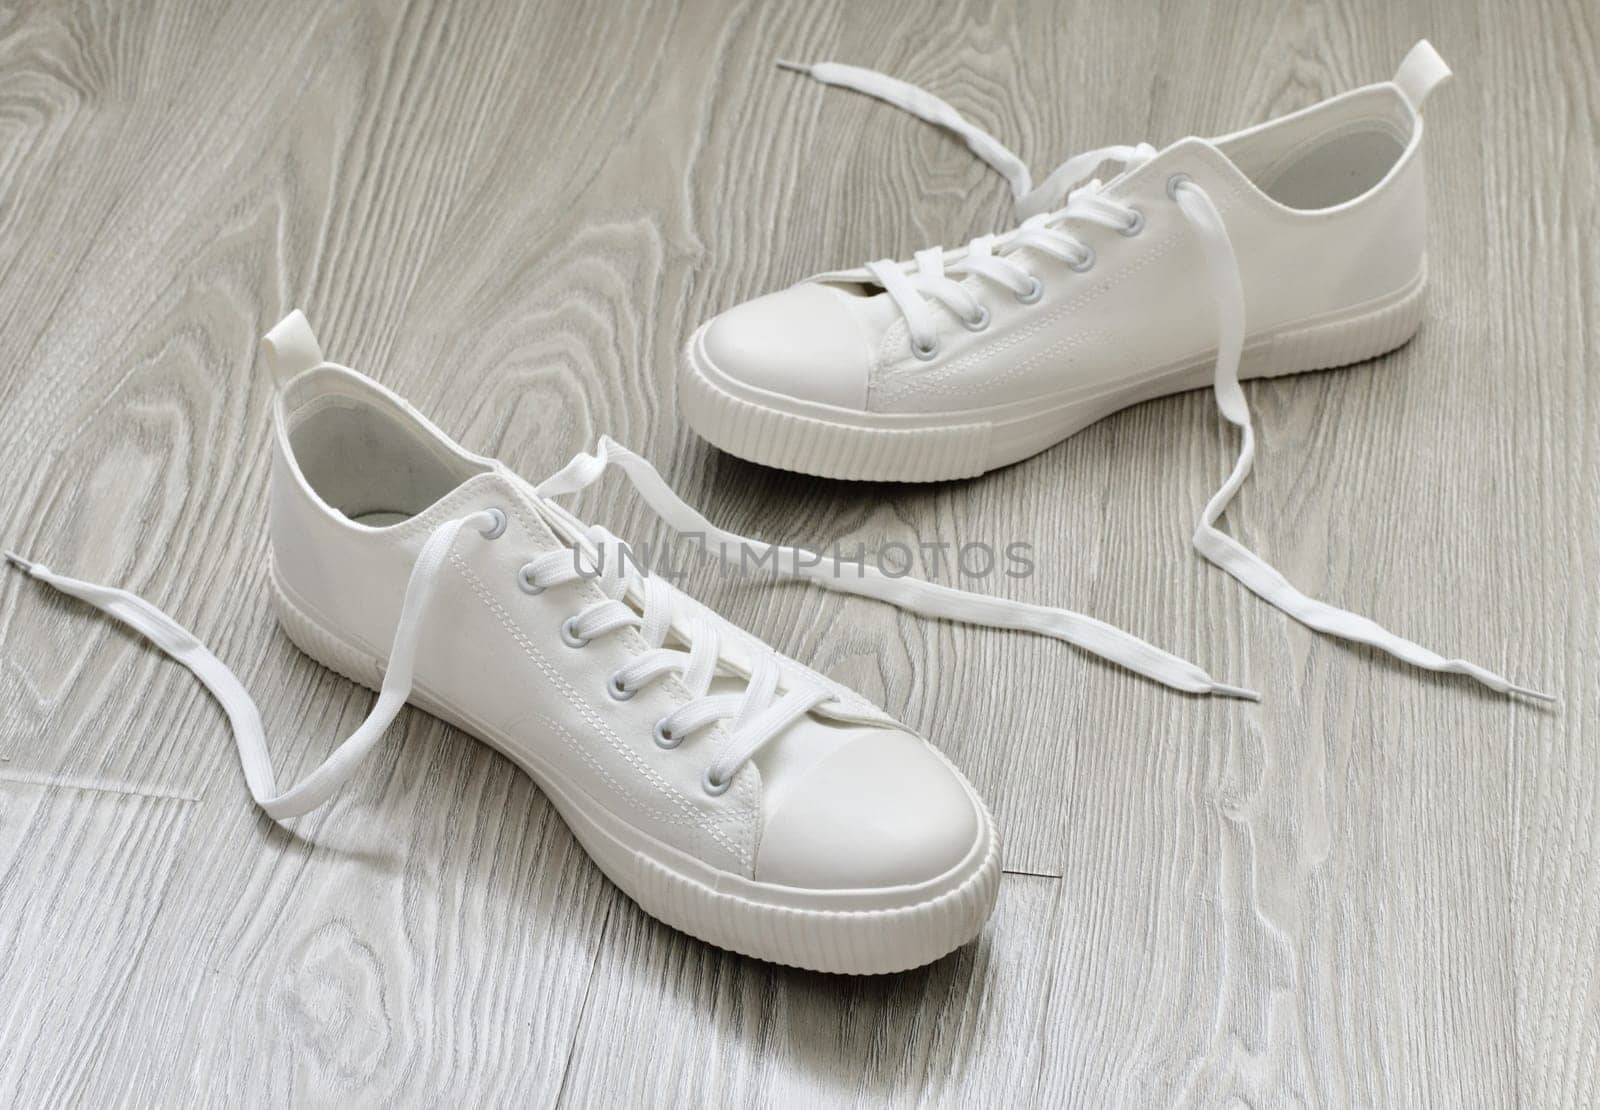 White sneakers with untied laces are on the floor